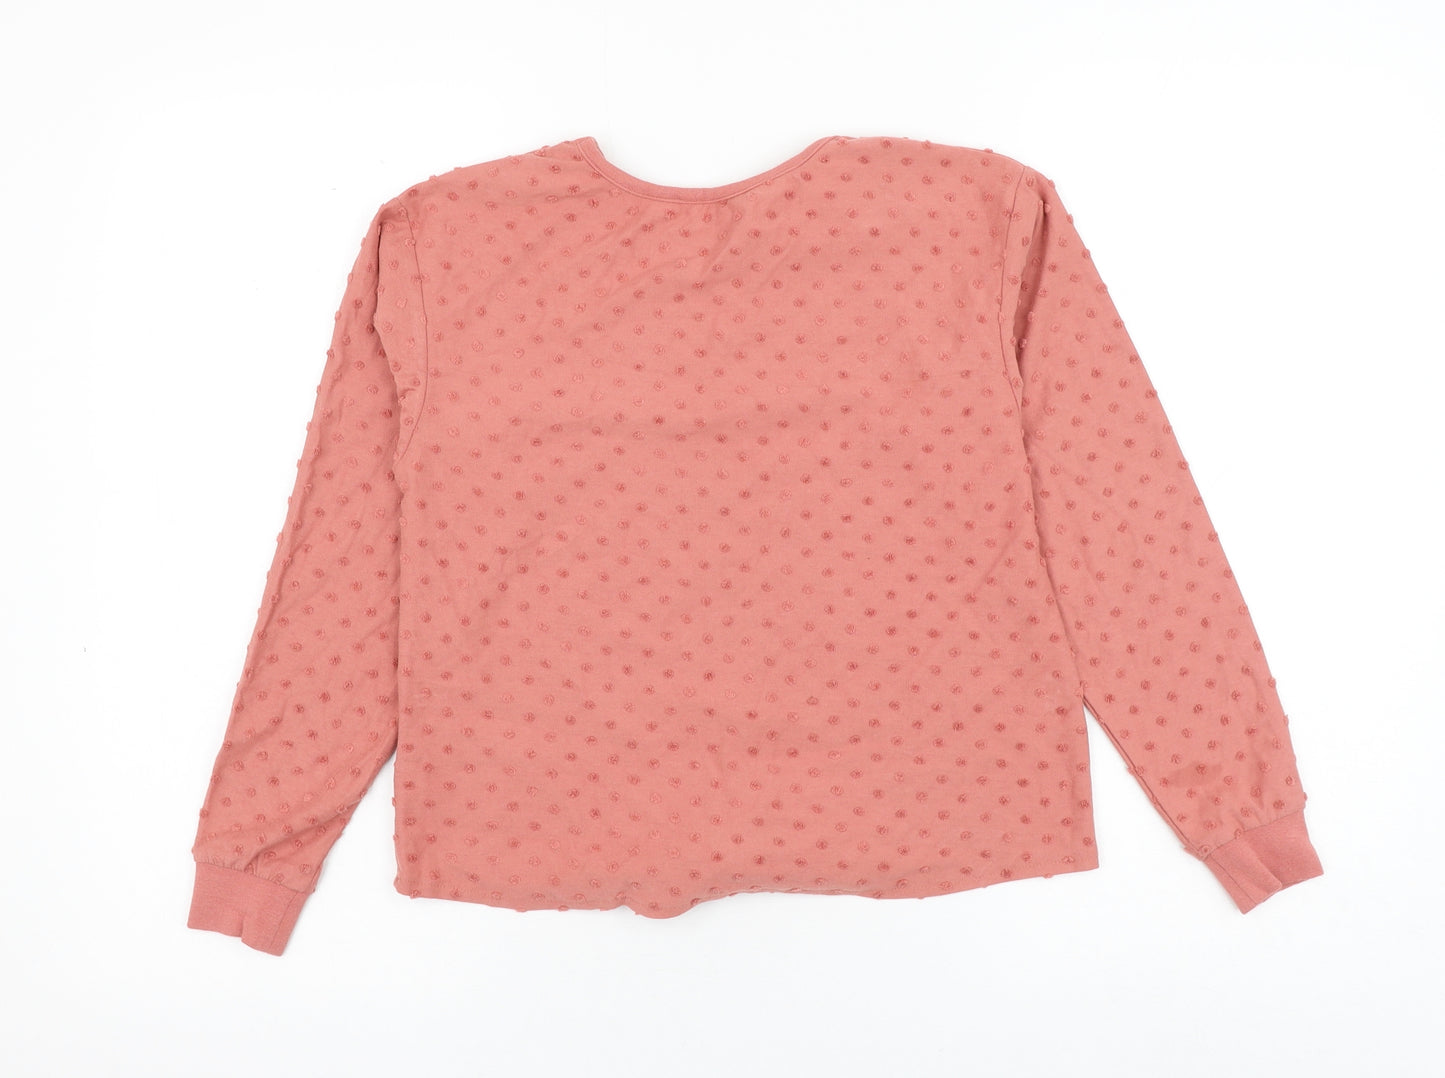 H&M Girls Pink Polka Dot Cotton Pullover Sweatshirt Size 8-9 Years Pullover - Knot Front